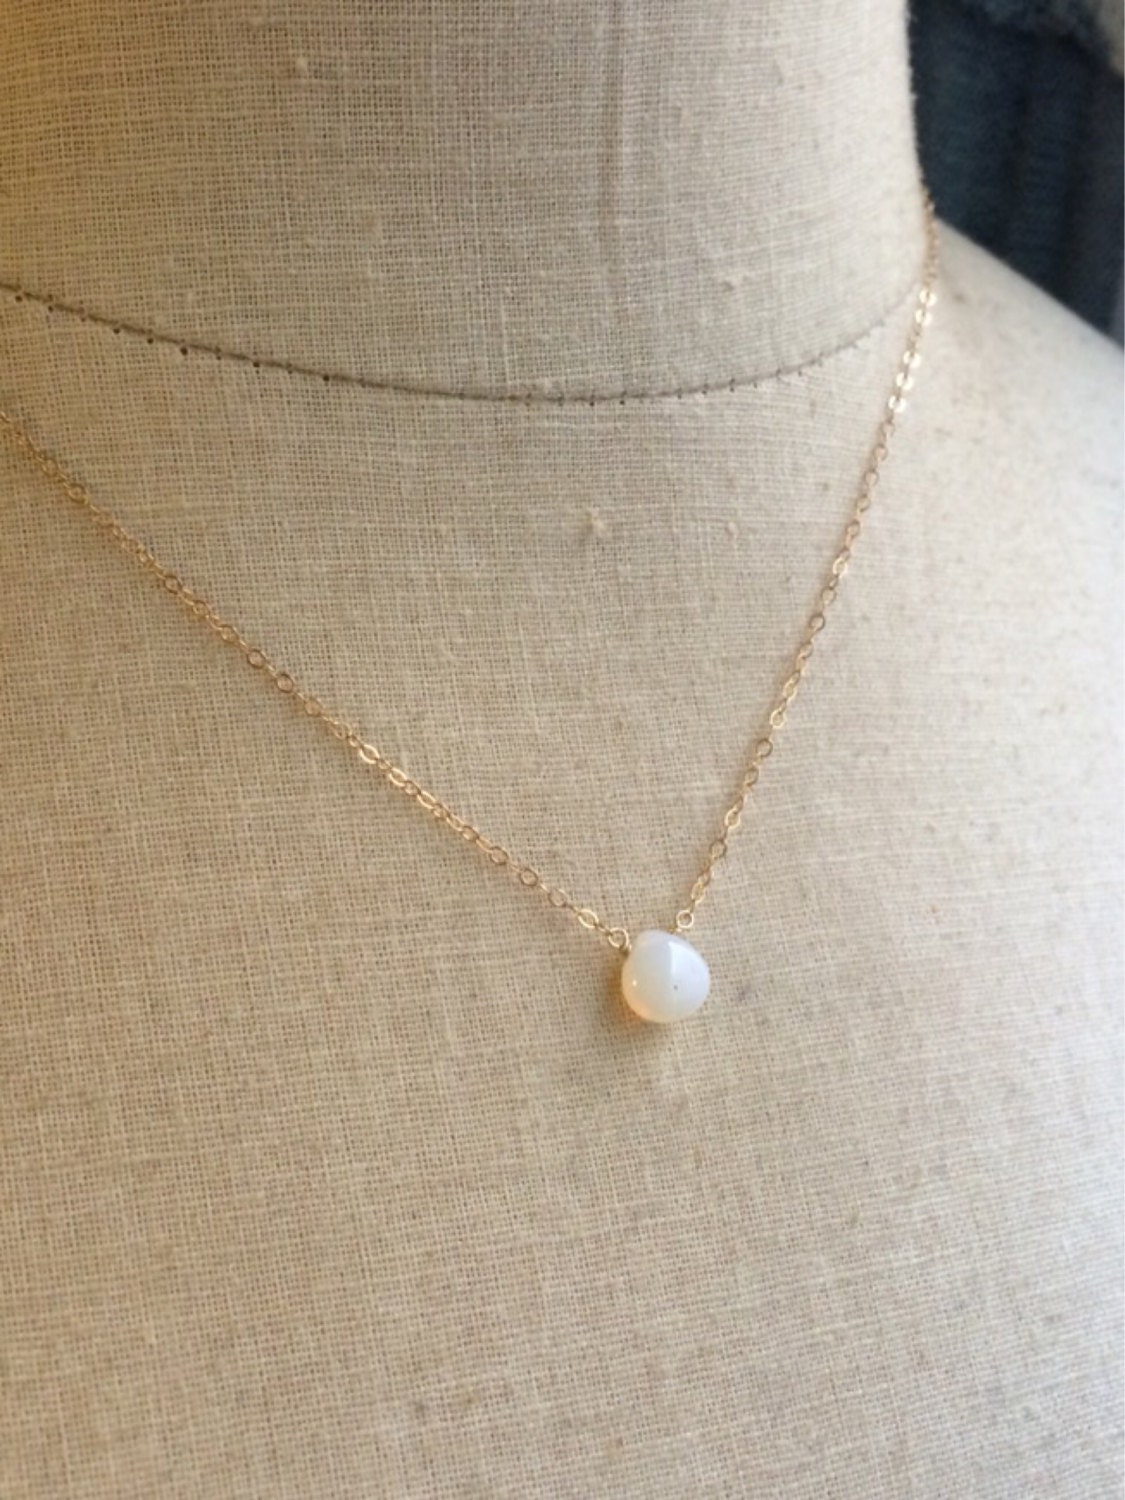 White Opal Necklace Birthstone Necklace October Birthstone